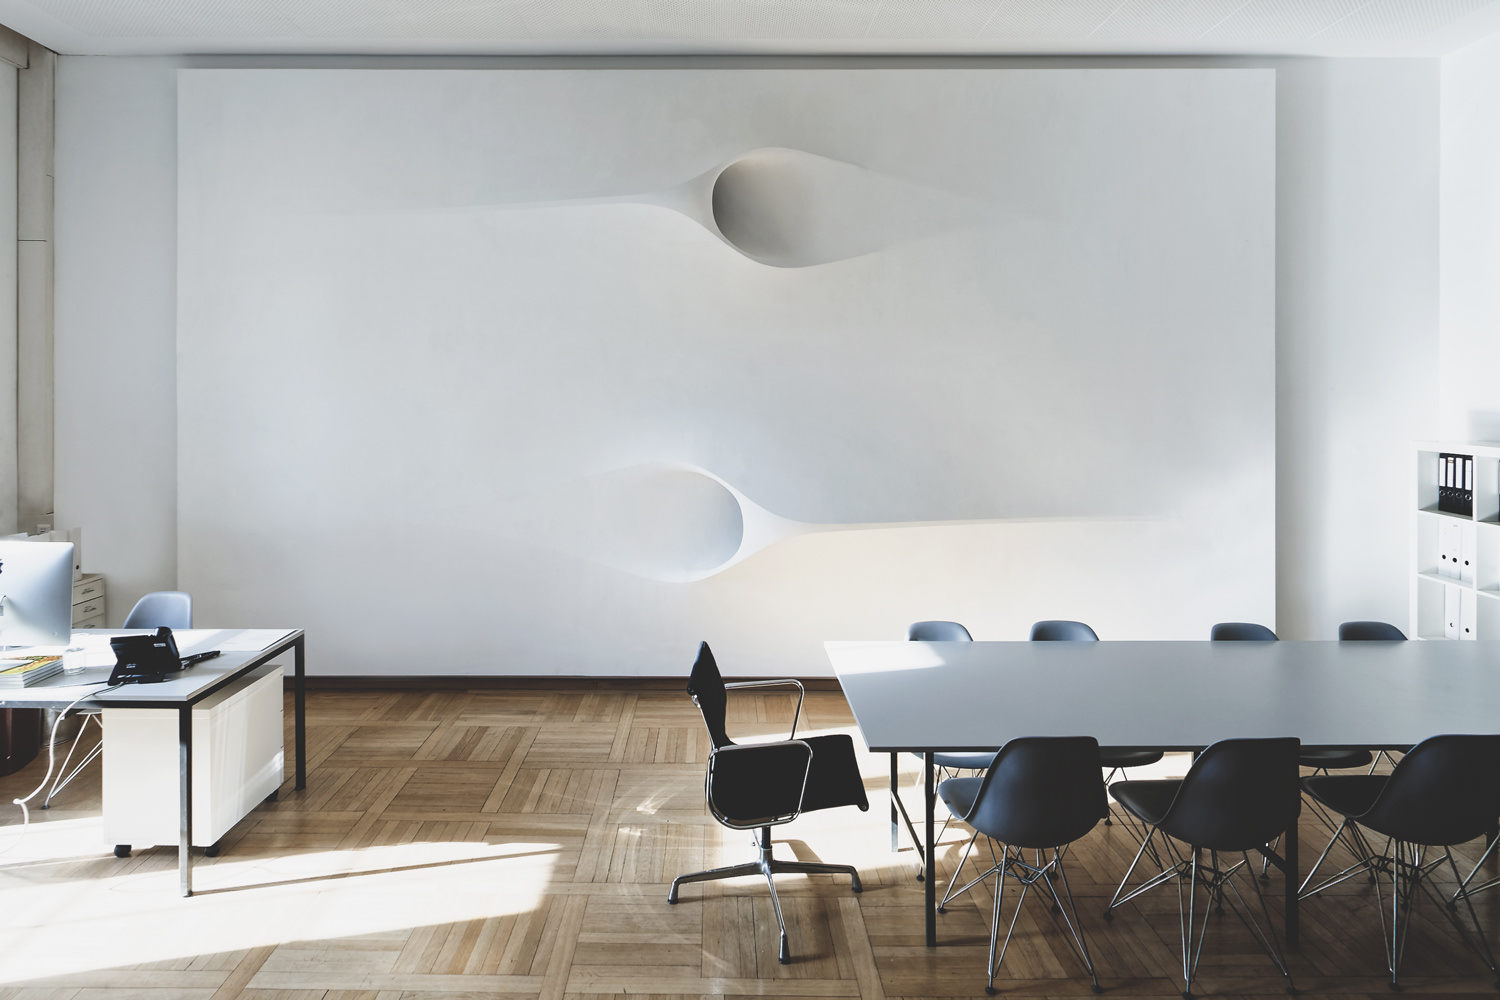 projector-ceiling-moh-architects-joerg-hugo-conferencetable3.jpg